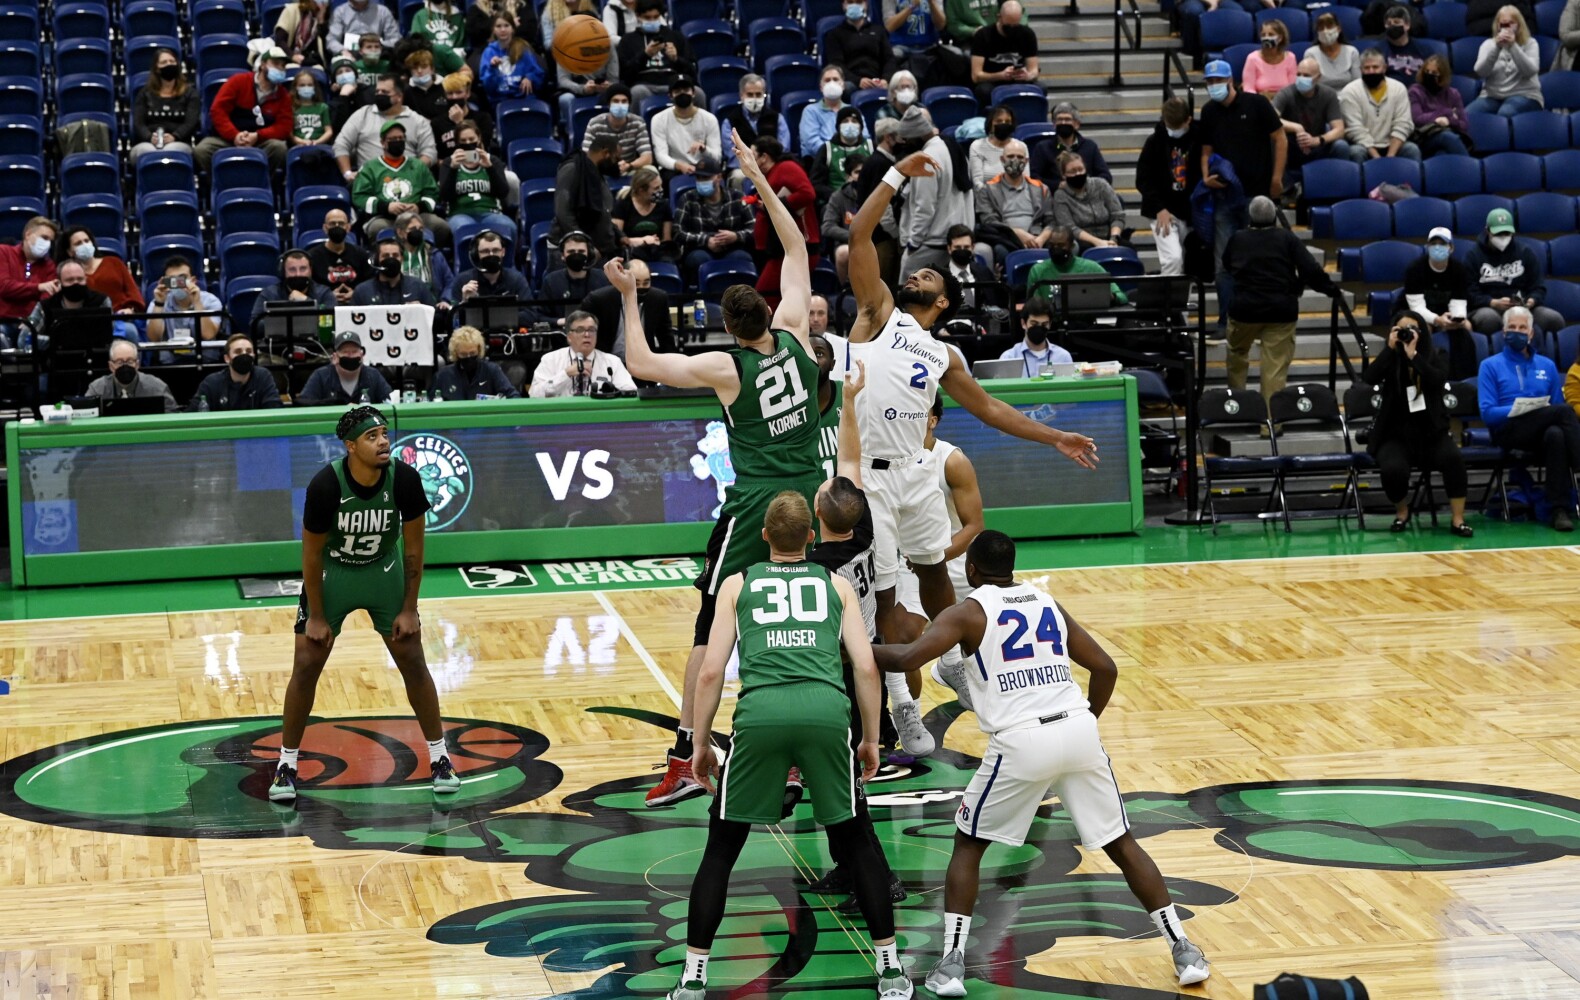 Late game heroics lead Delaware Blue Coats to victory over Maine Celtics